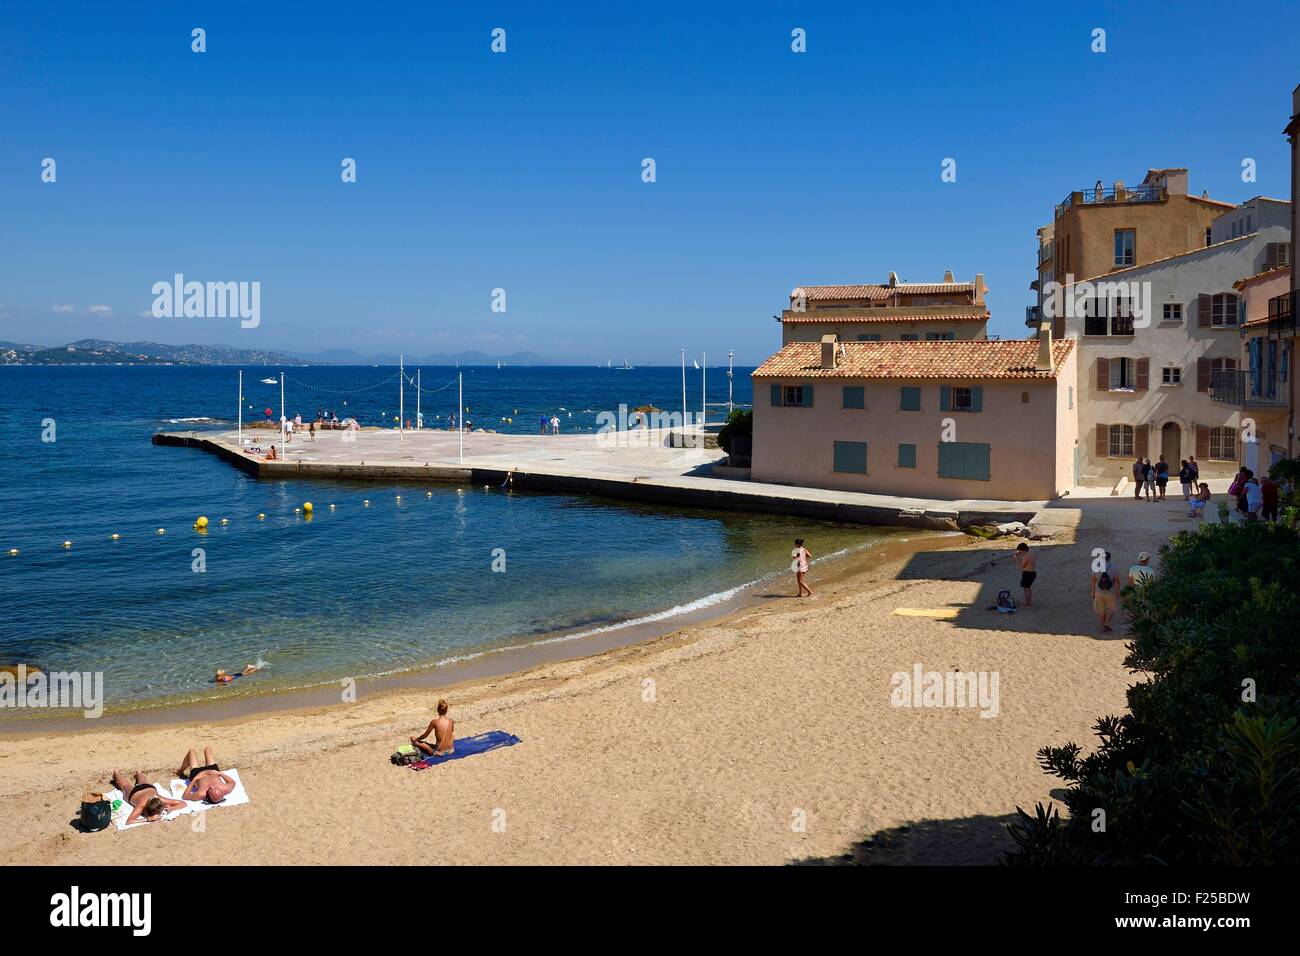 France, Var, Saint-Tropez, Plage de la Ponche Beach where are built the high houses with facade of ochre, yellow or orange colors Stock Photo